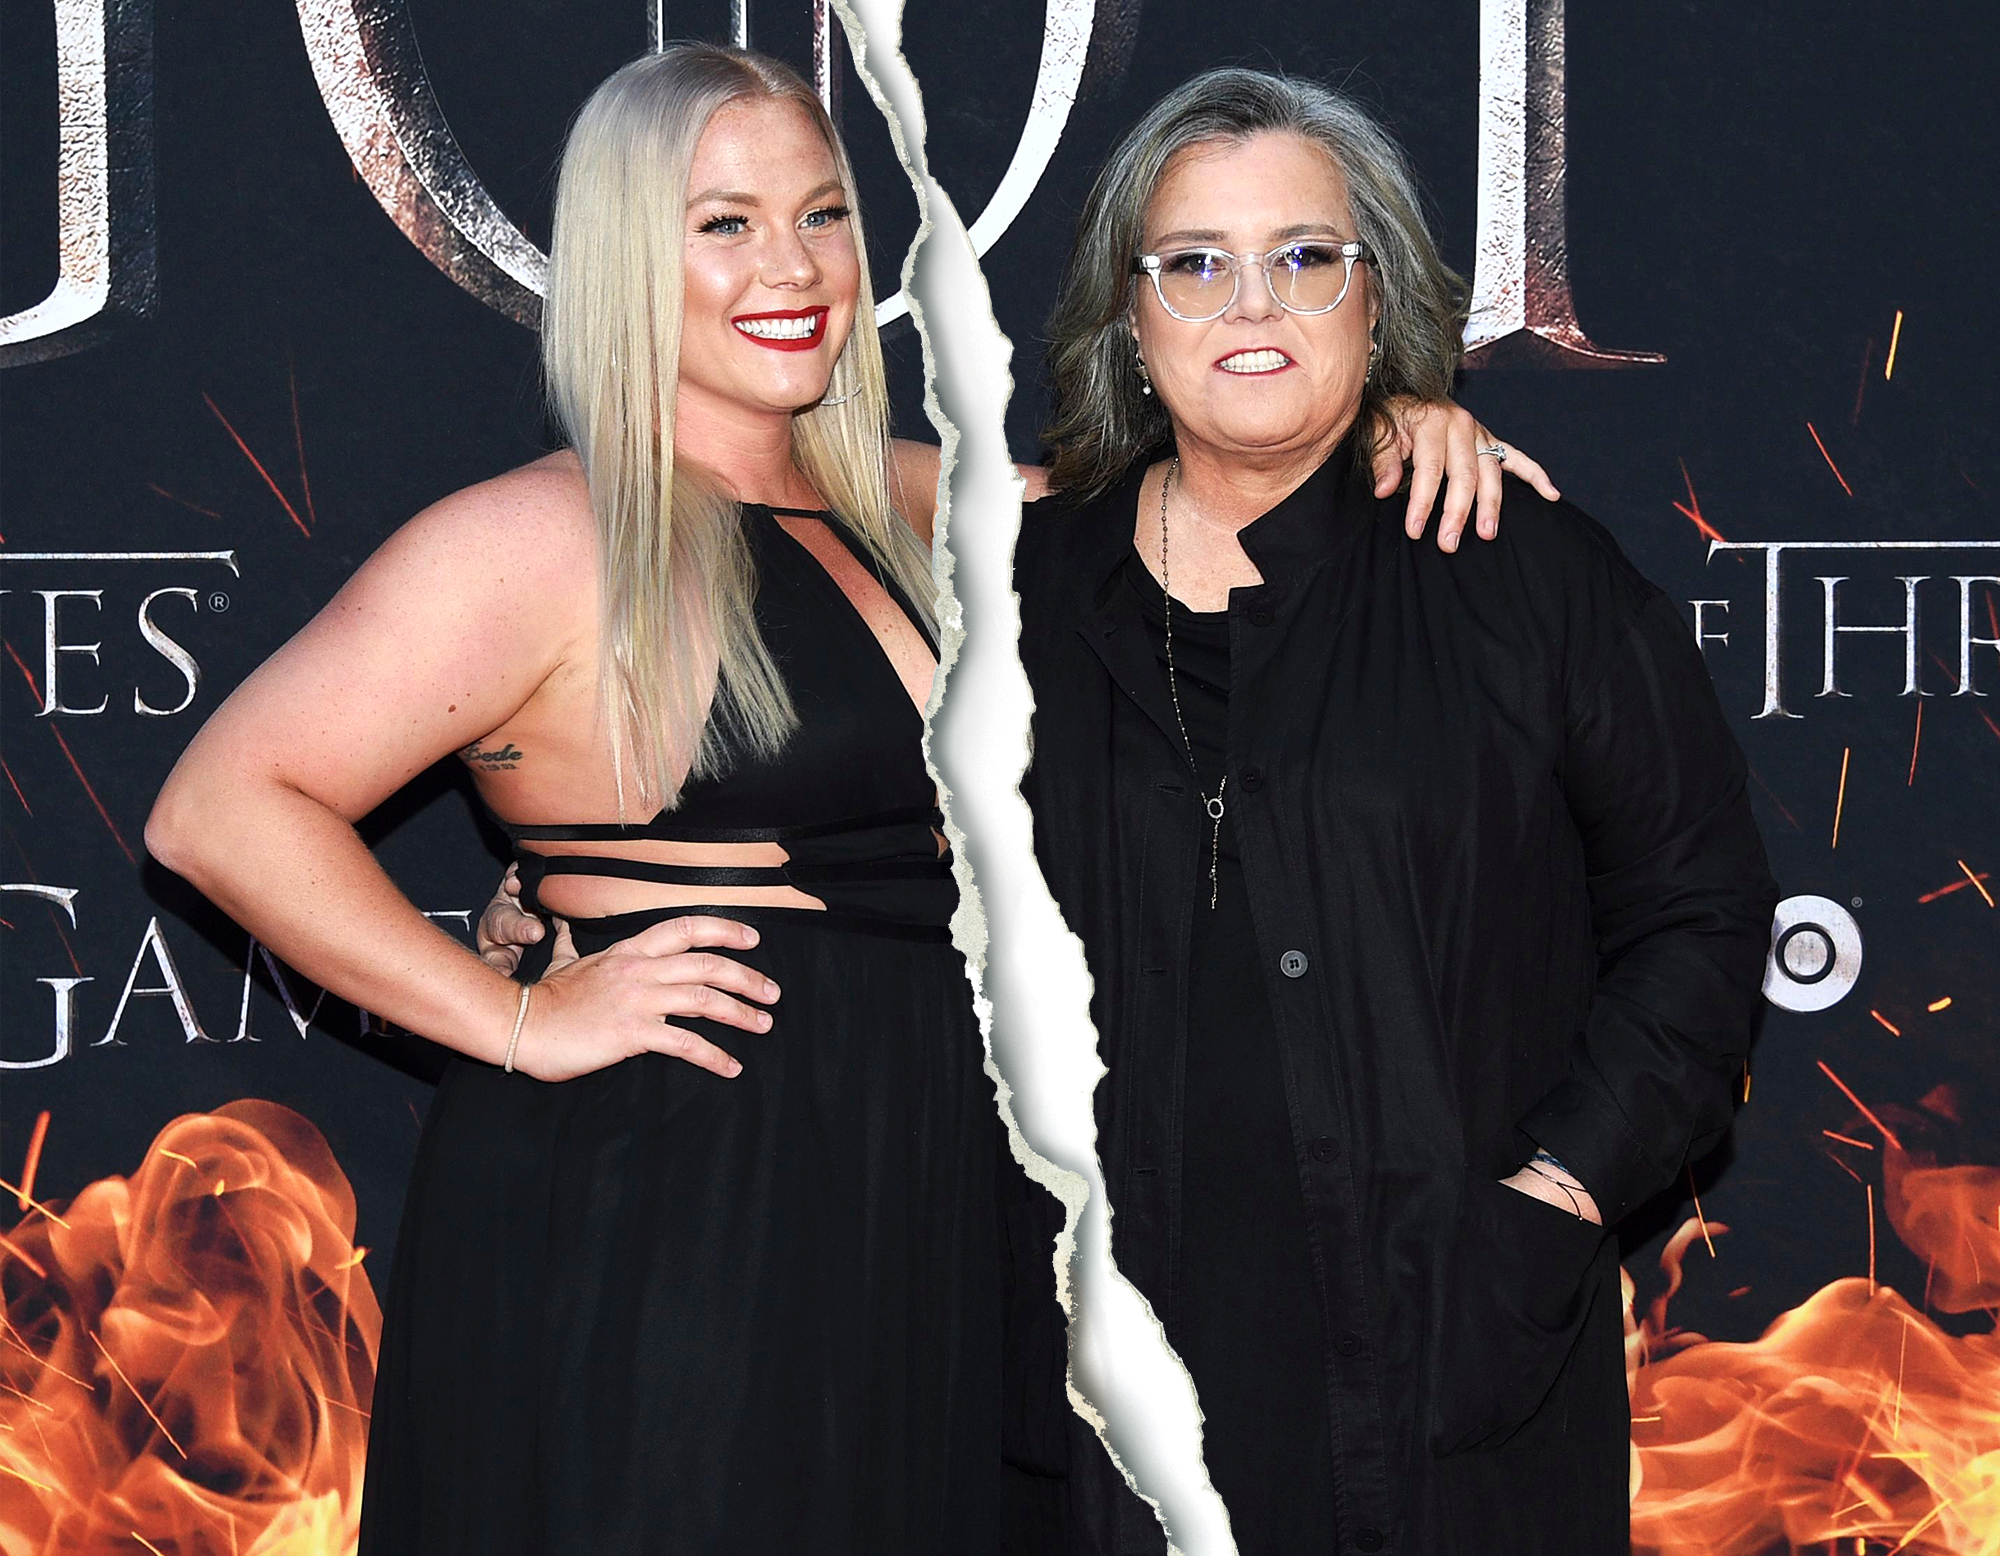 Rosie ODonnell and Elizabeth Rooney